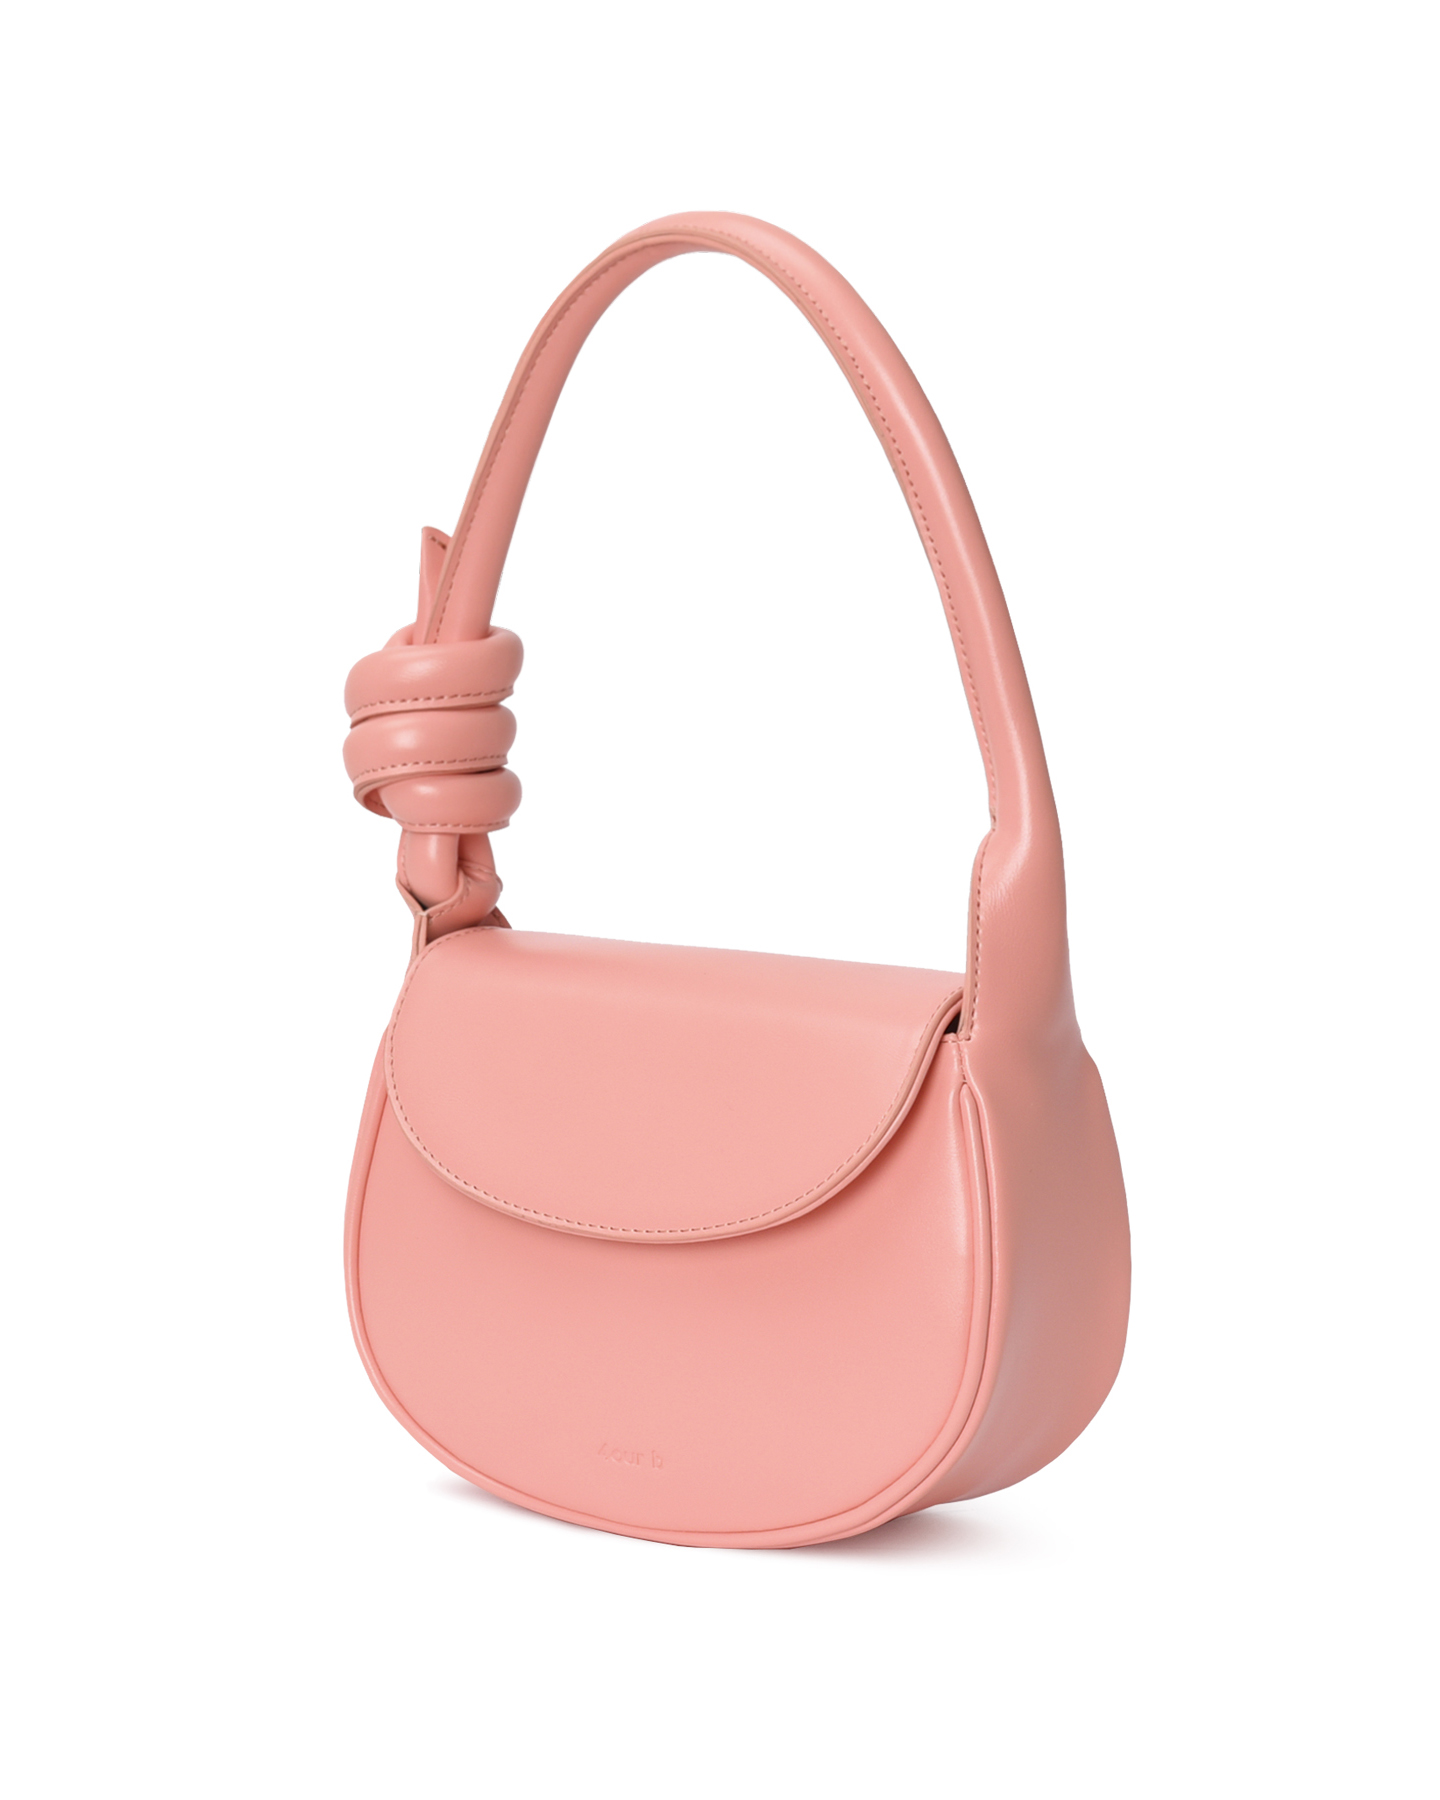 80% off / Dolphin Bag Pink